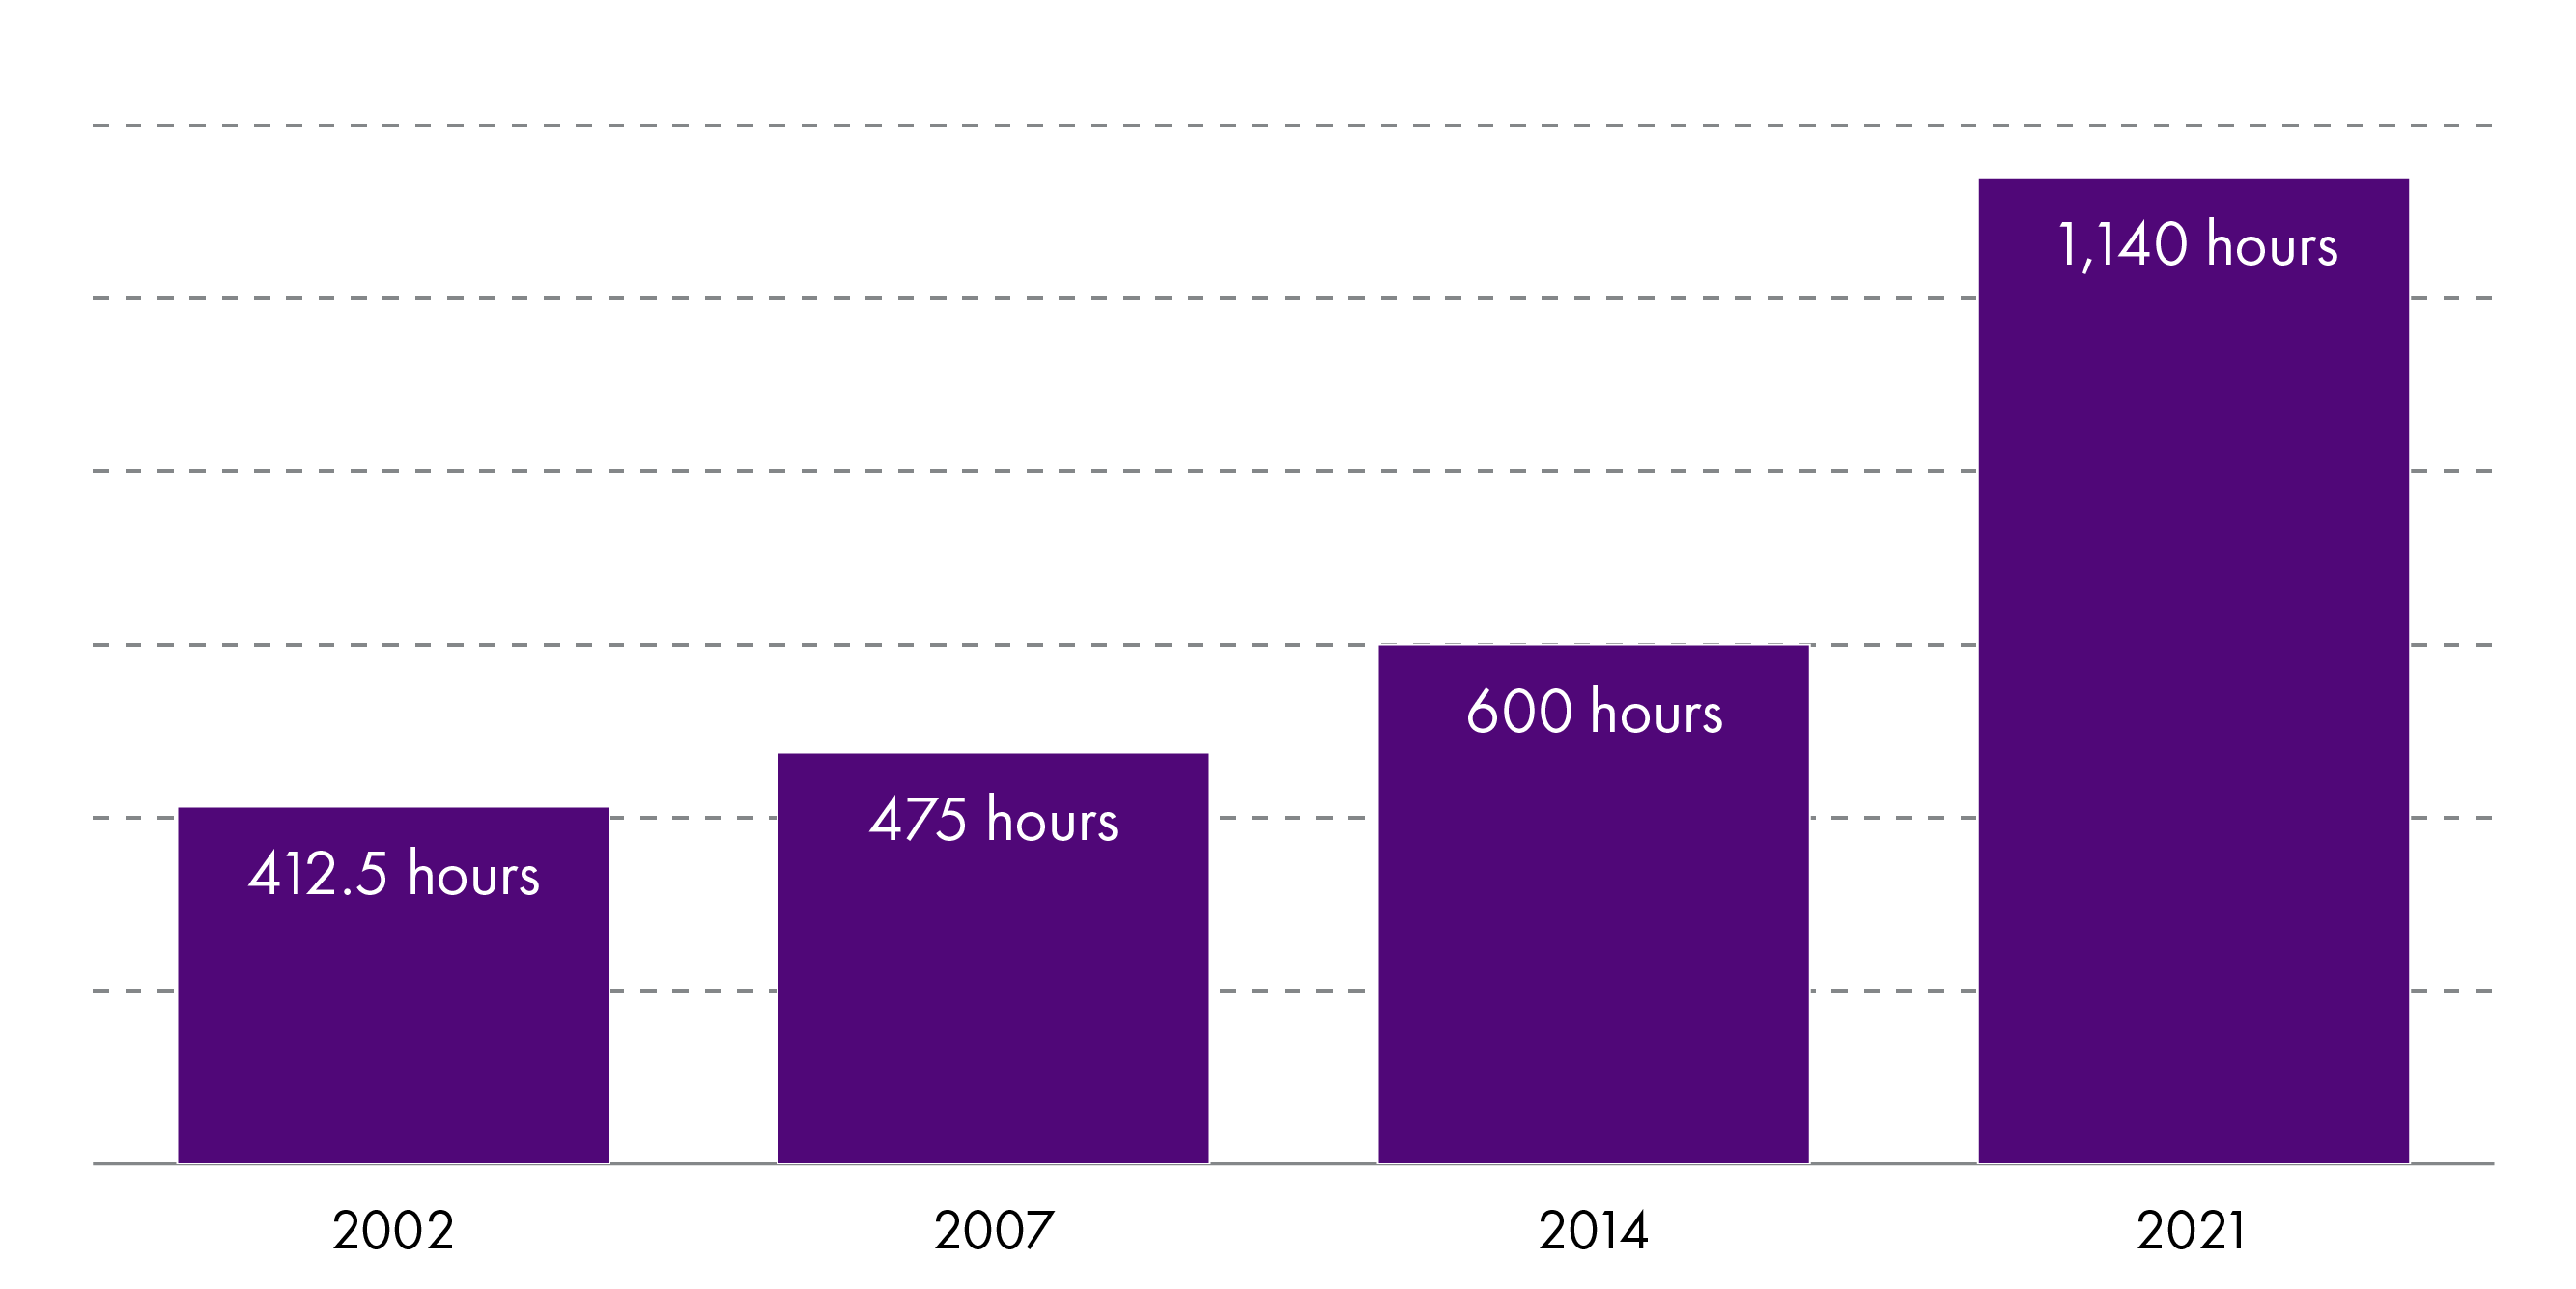 The number of funded hours of ELC in 2002 was 412.5 hours. This increased to 475 hours in 2007, 600 hours in 2014 and 1140 hours in 2021.